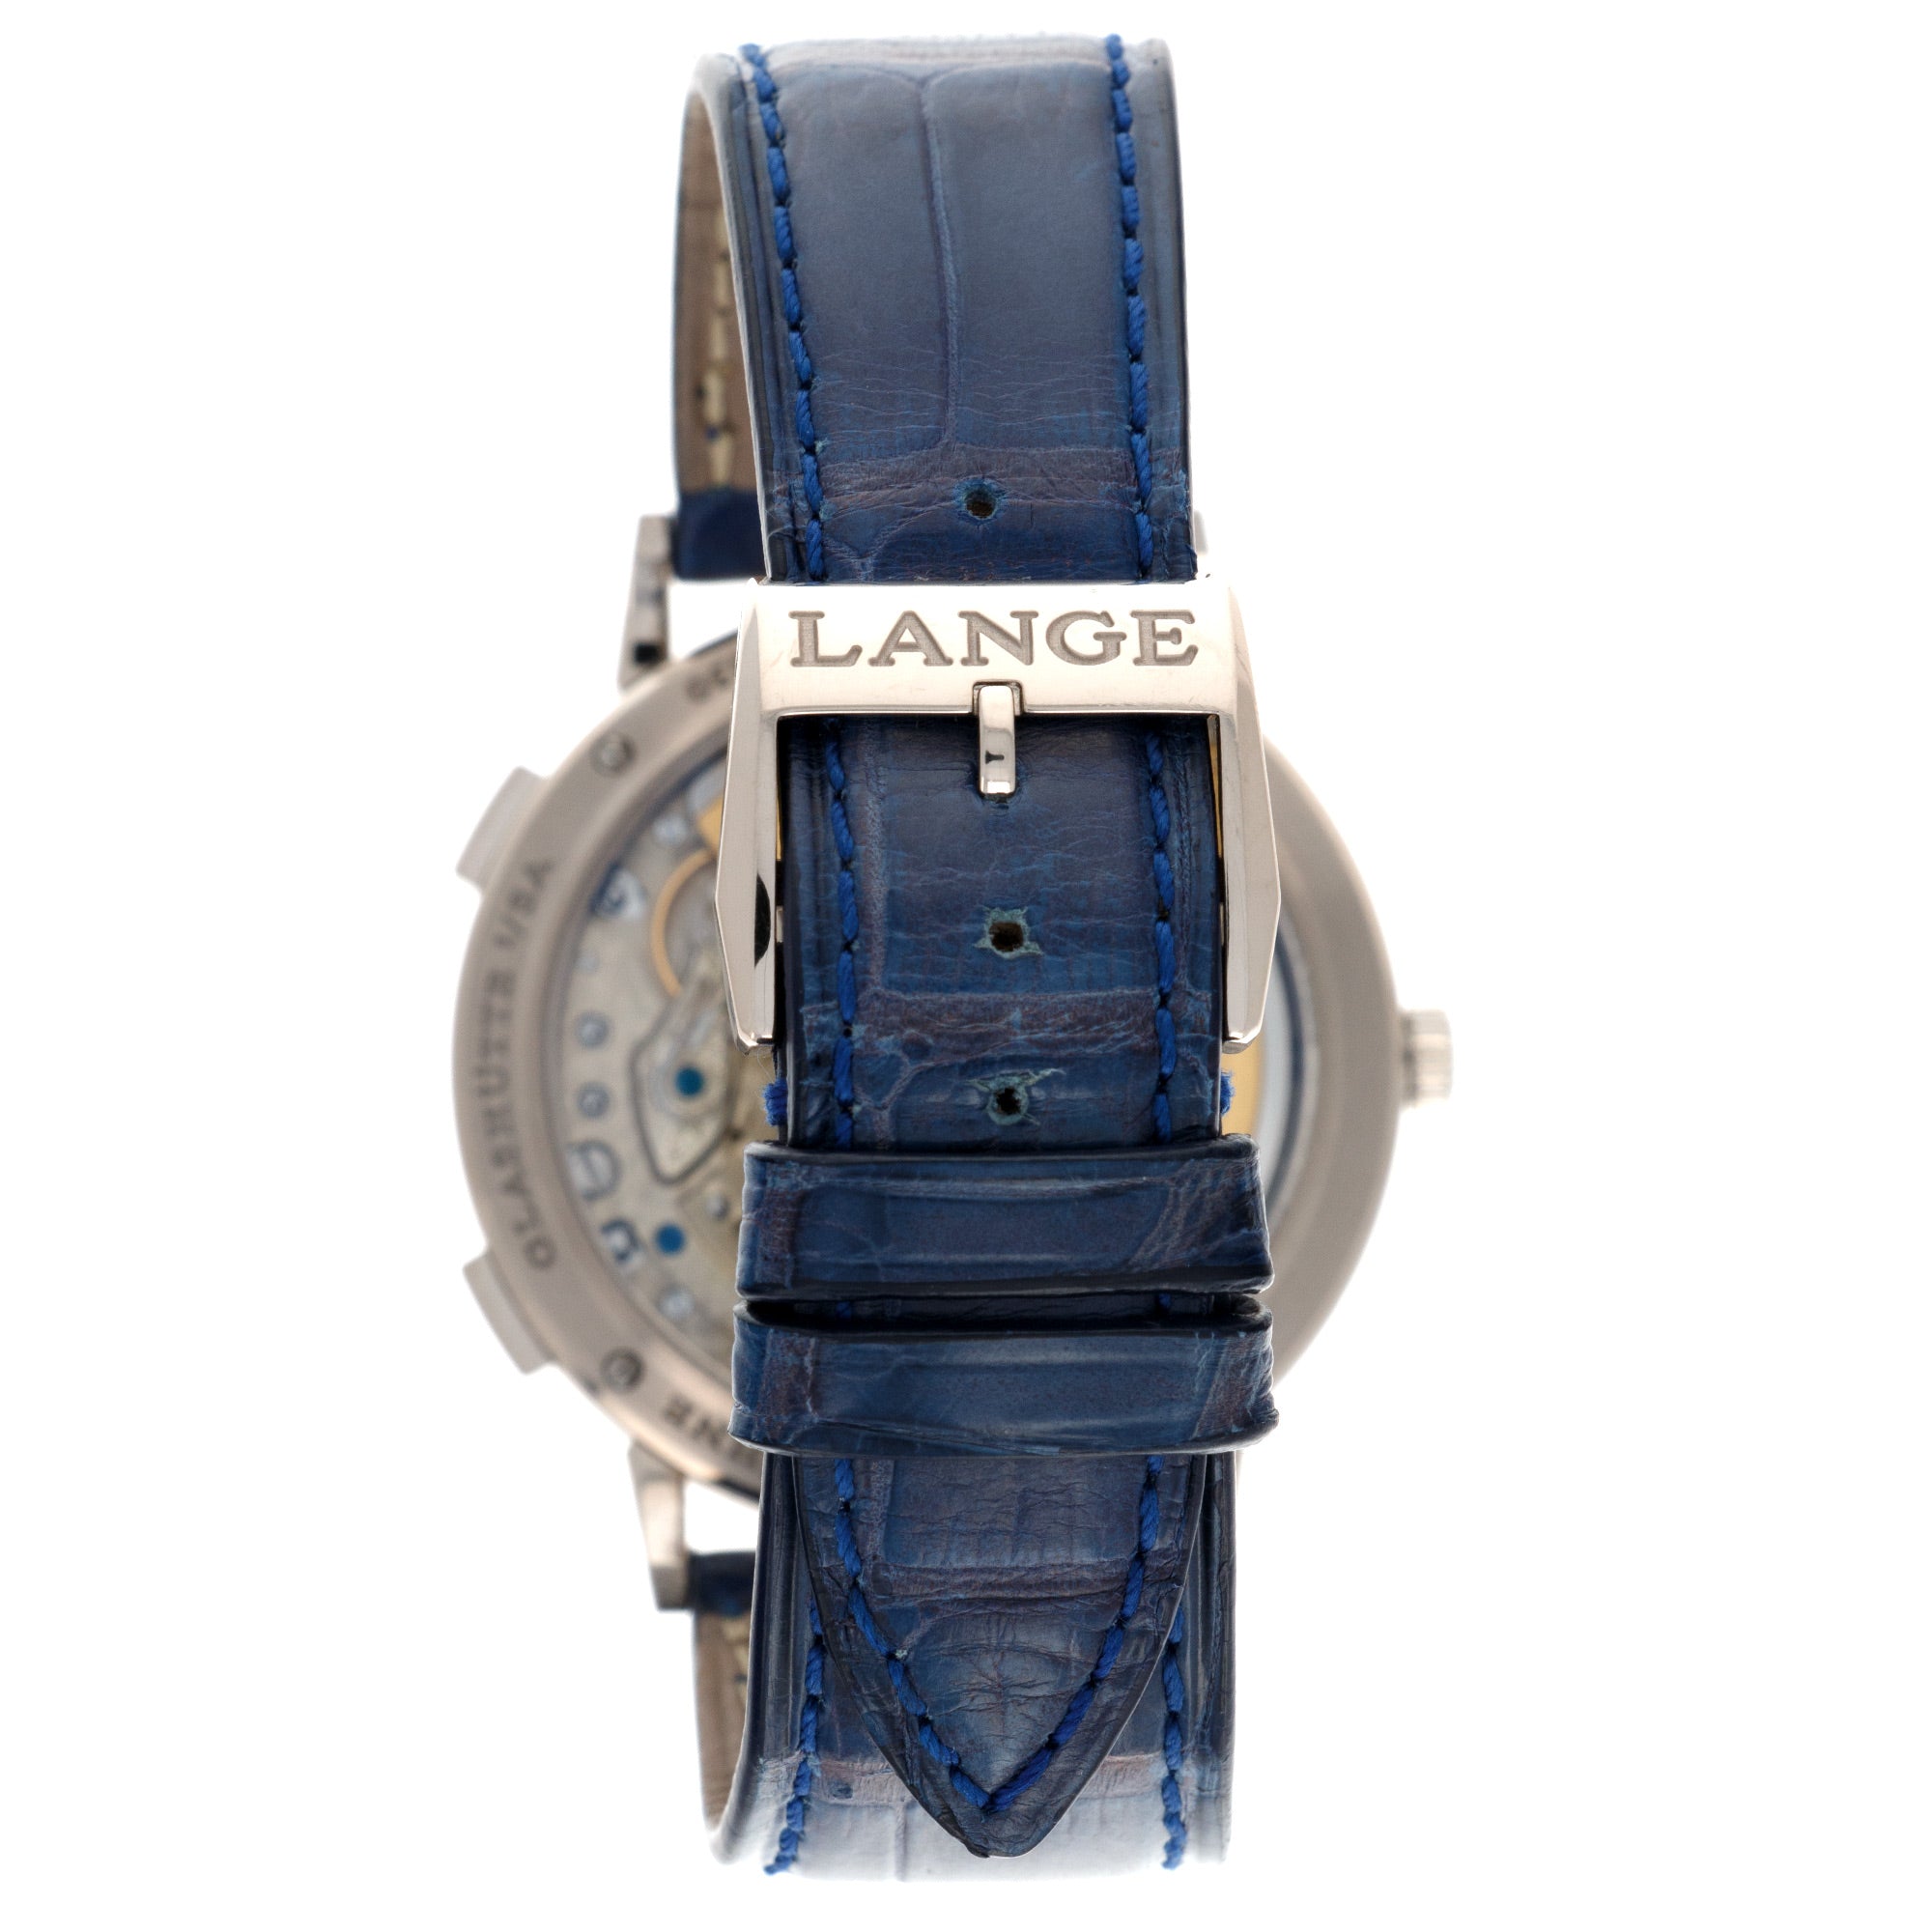 A. Lange &amp; Sohne White Gold Dual TIme Watch, Ref. 386.026